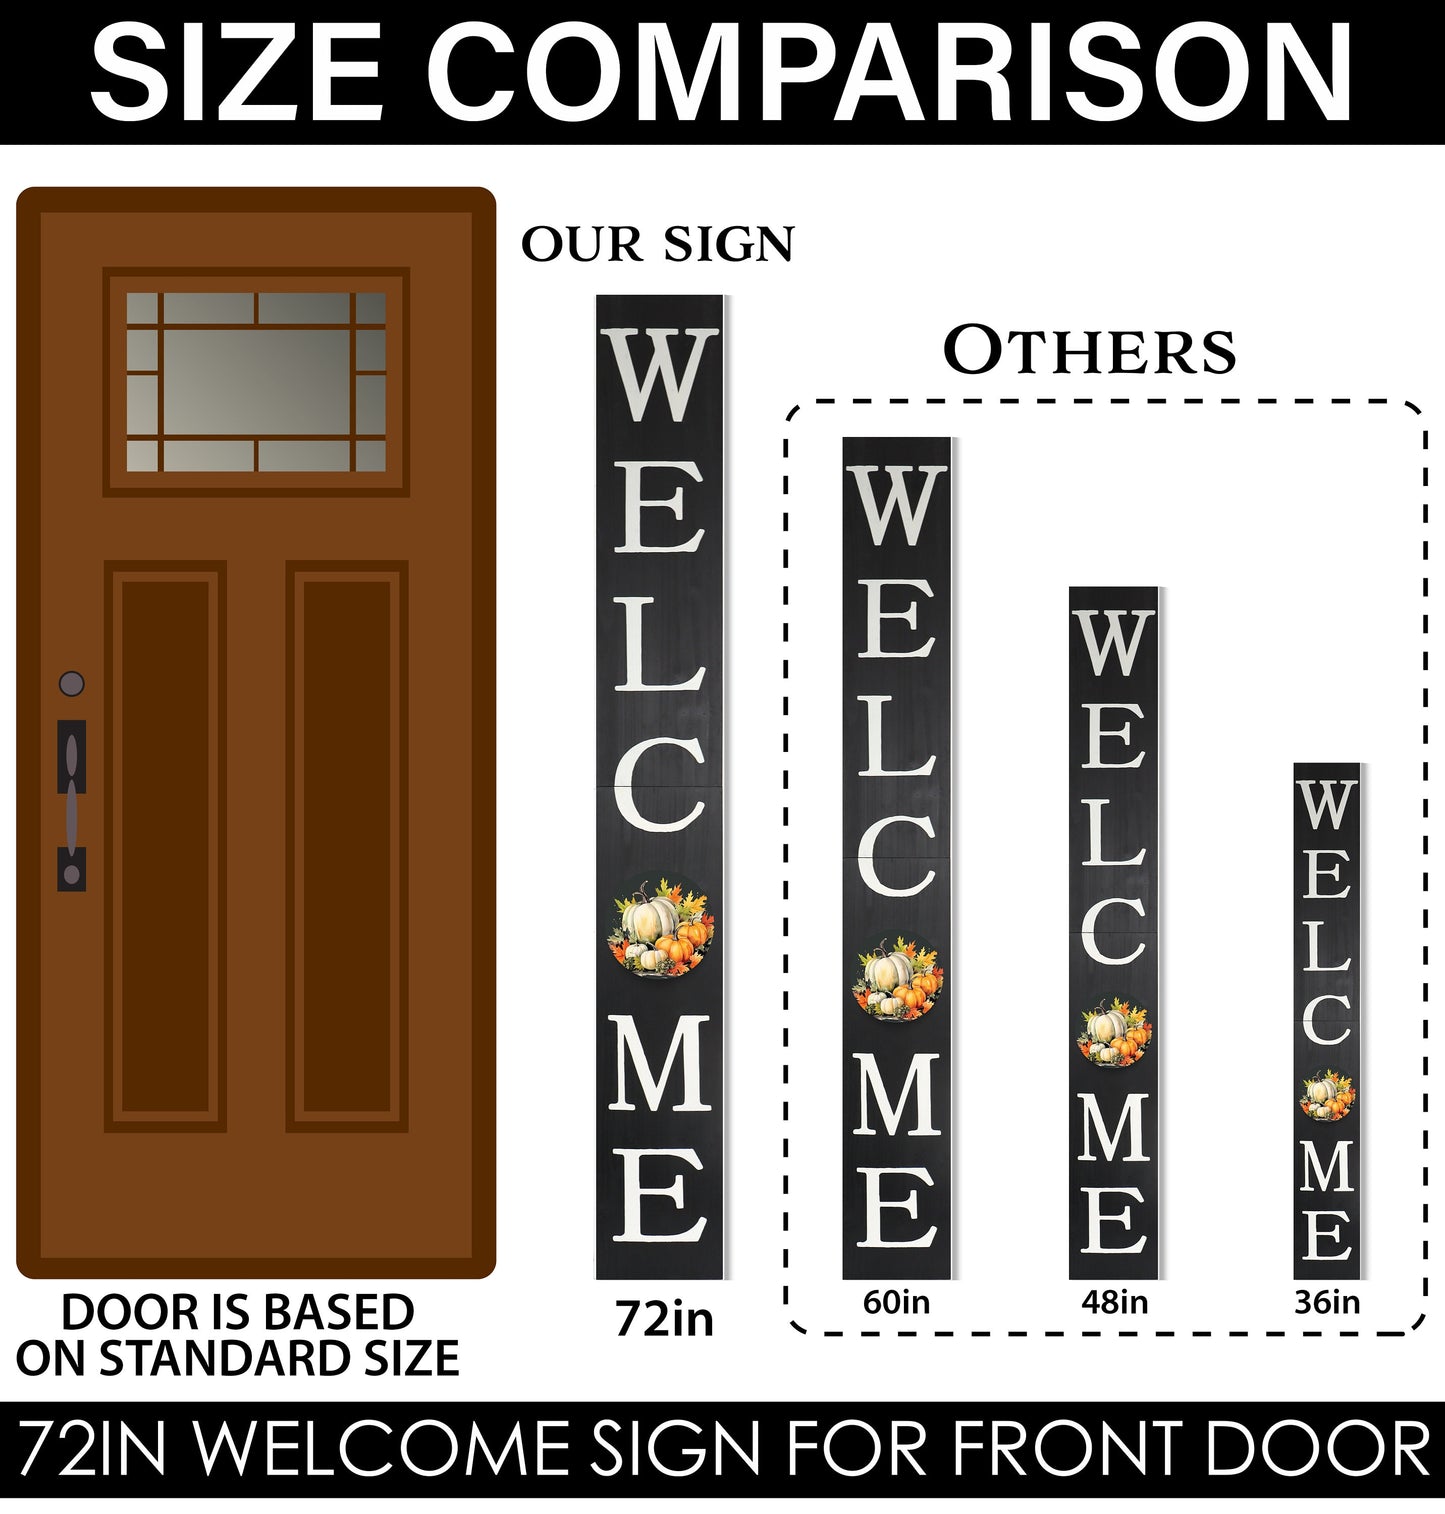 72in "Welcome" Fall Porch Sign with Pumpkins Design - Black Porch Board Decor for Front Door during Autumn and Thanksgiving Celebrations